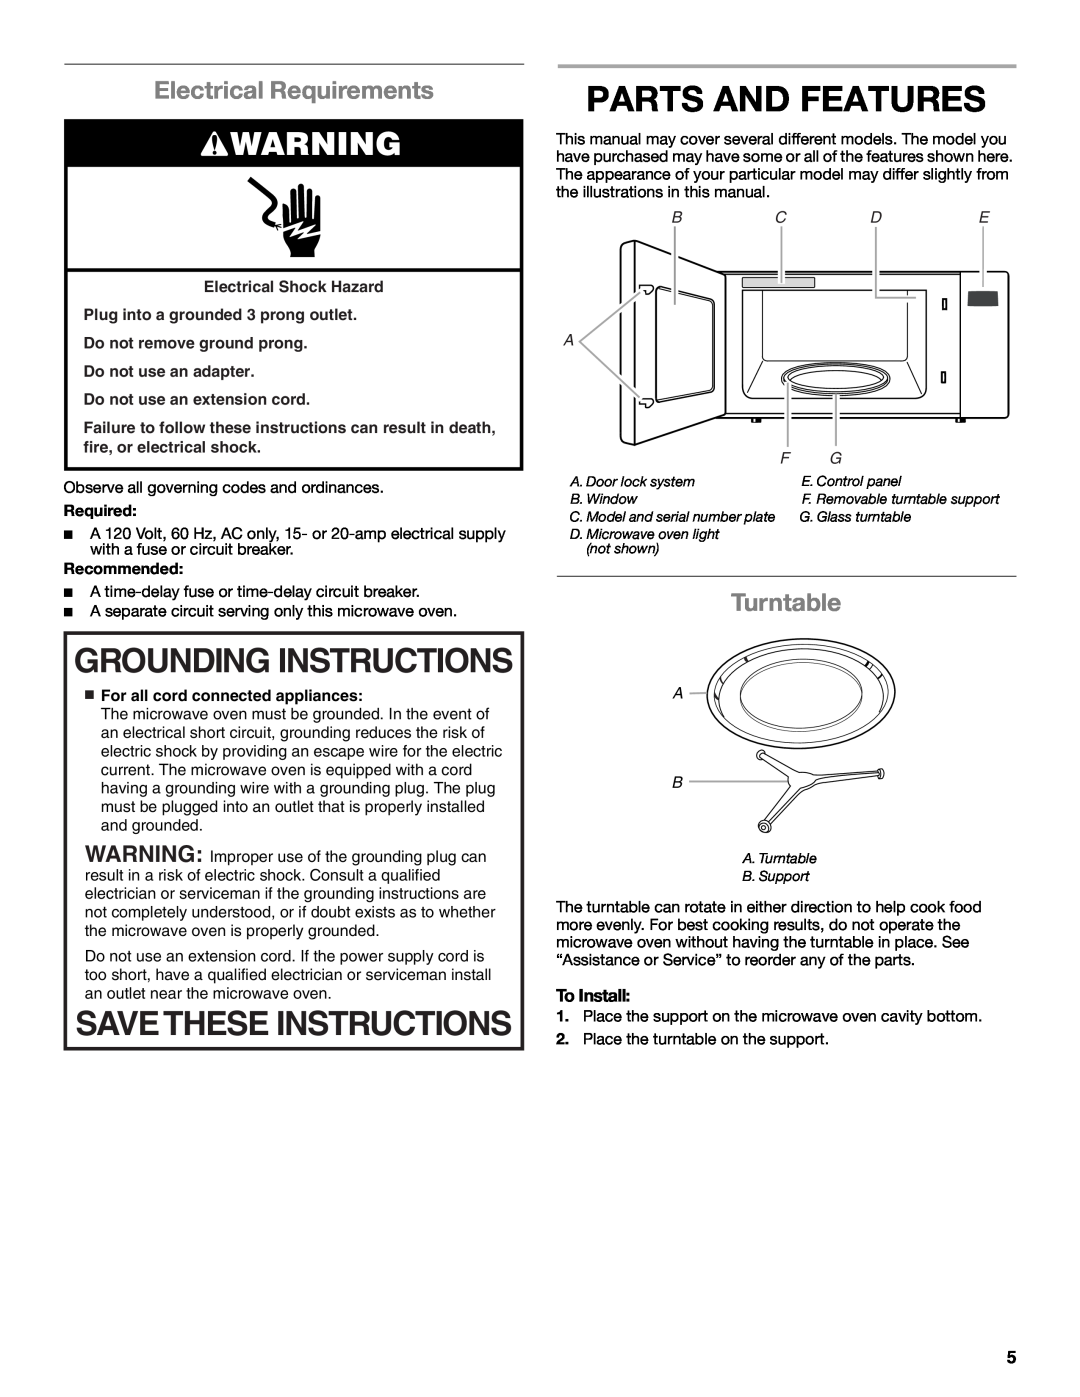 Whirlpool WMC10007 Parts And Features, Grounding Instructions, Savethese Instructions, Electrical Requirements, Turntable 